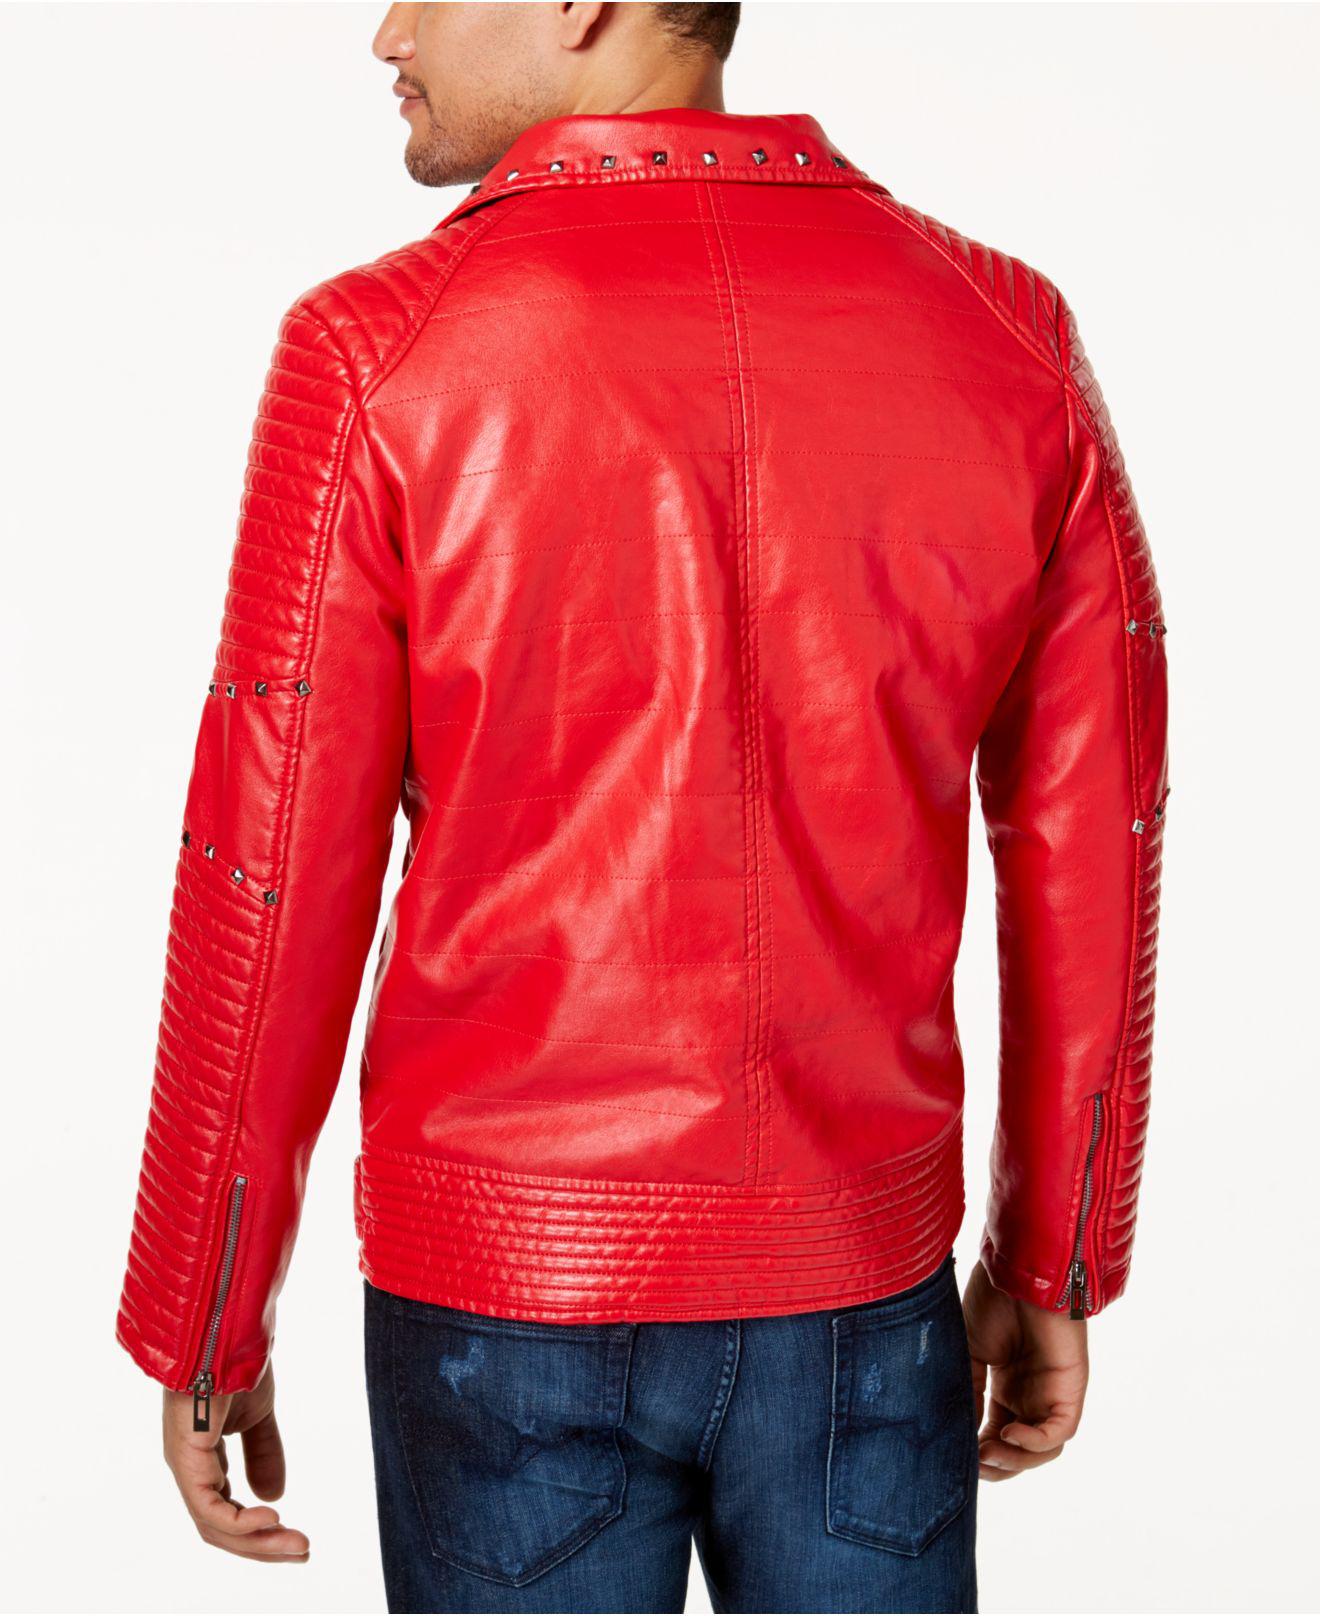 Reason Men's Red Studded Faux-leather Moto Jacket for Men - Lyst